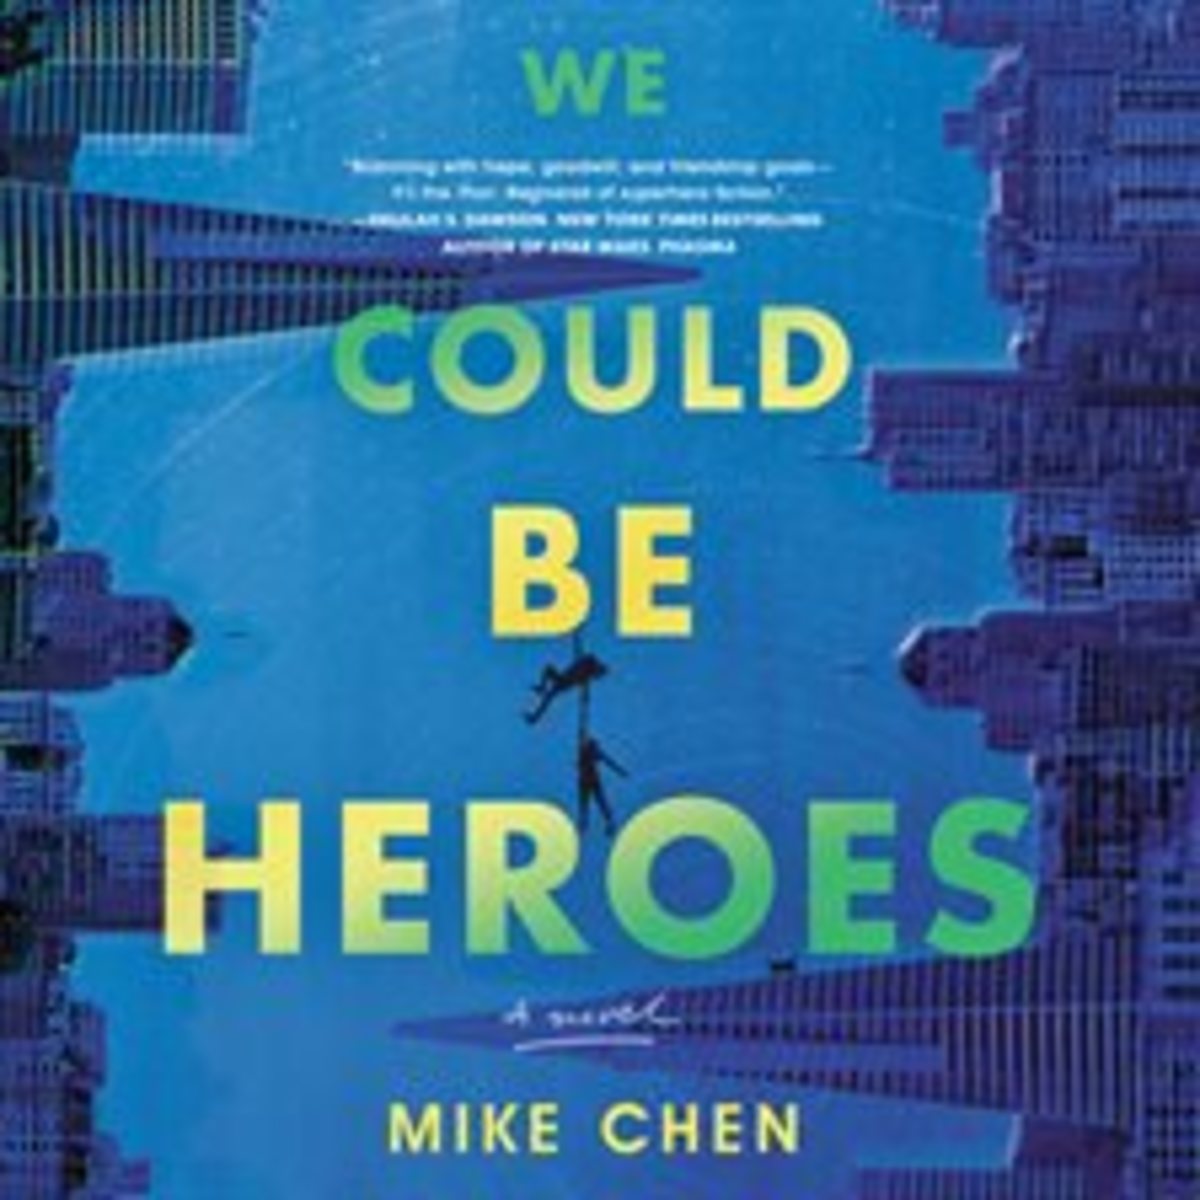 audiobook-review-we-could-be-heroes-mike-chen